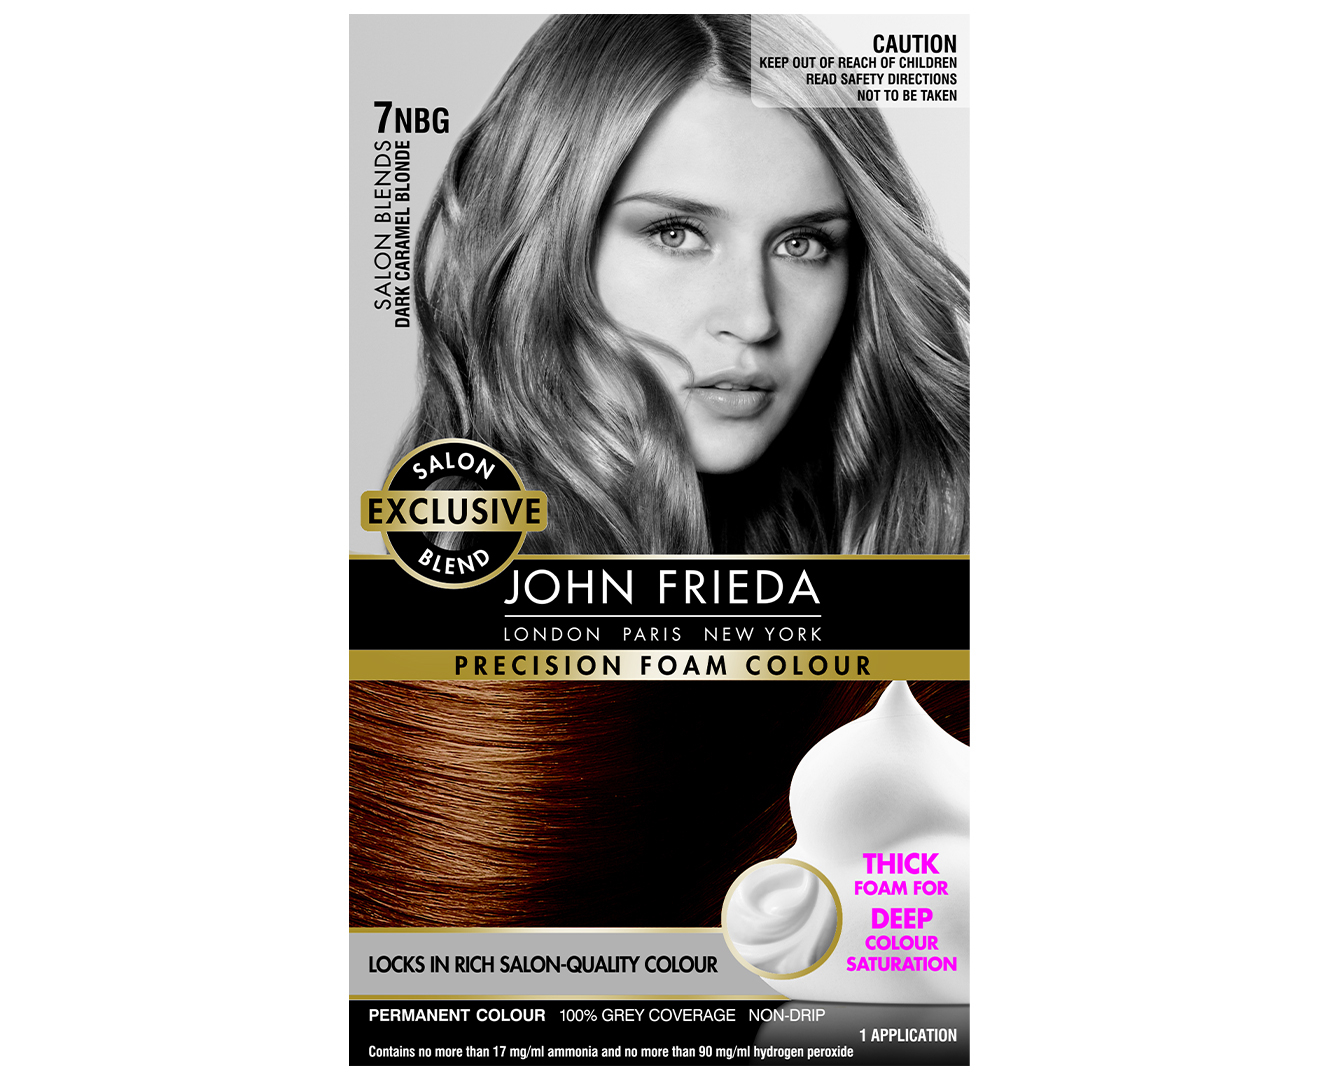 Chocolate gloss | Redken hair color, Brunette hair color, Redken hair  products